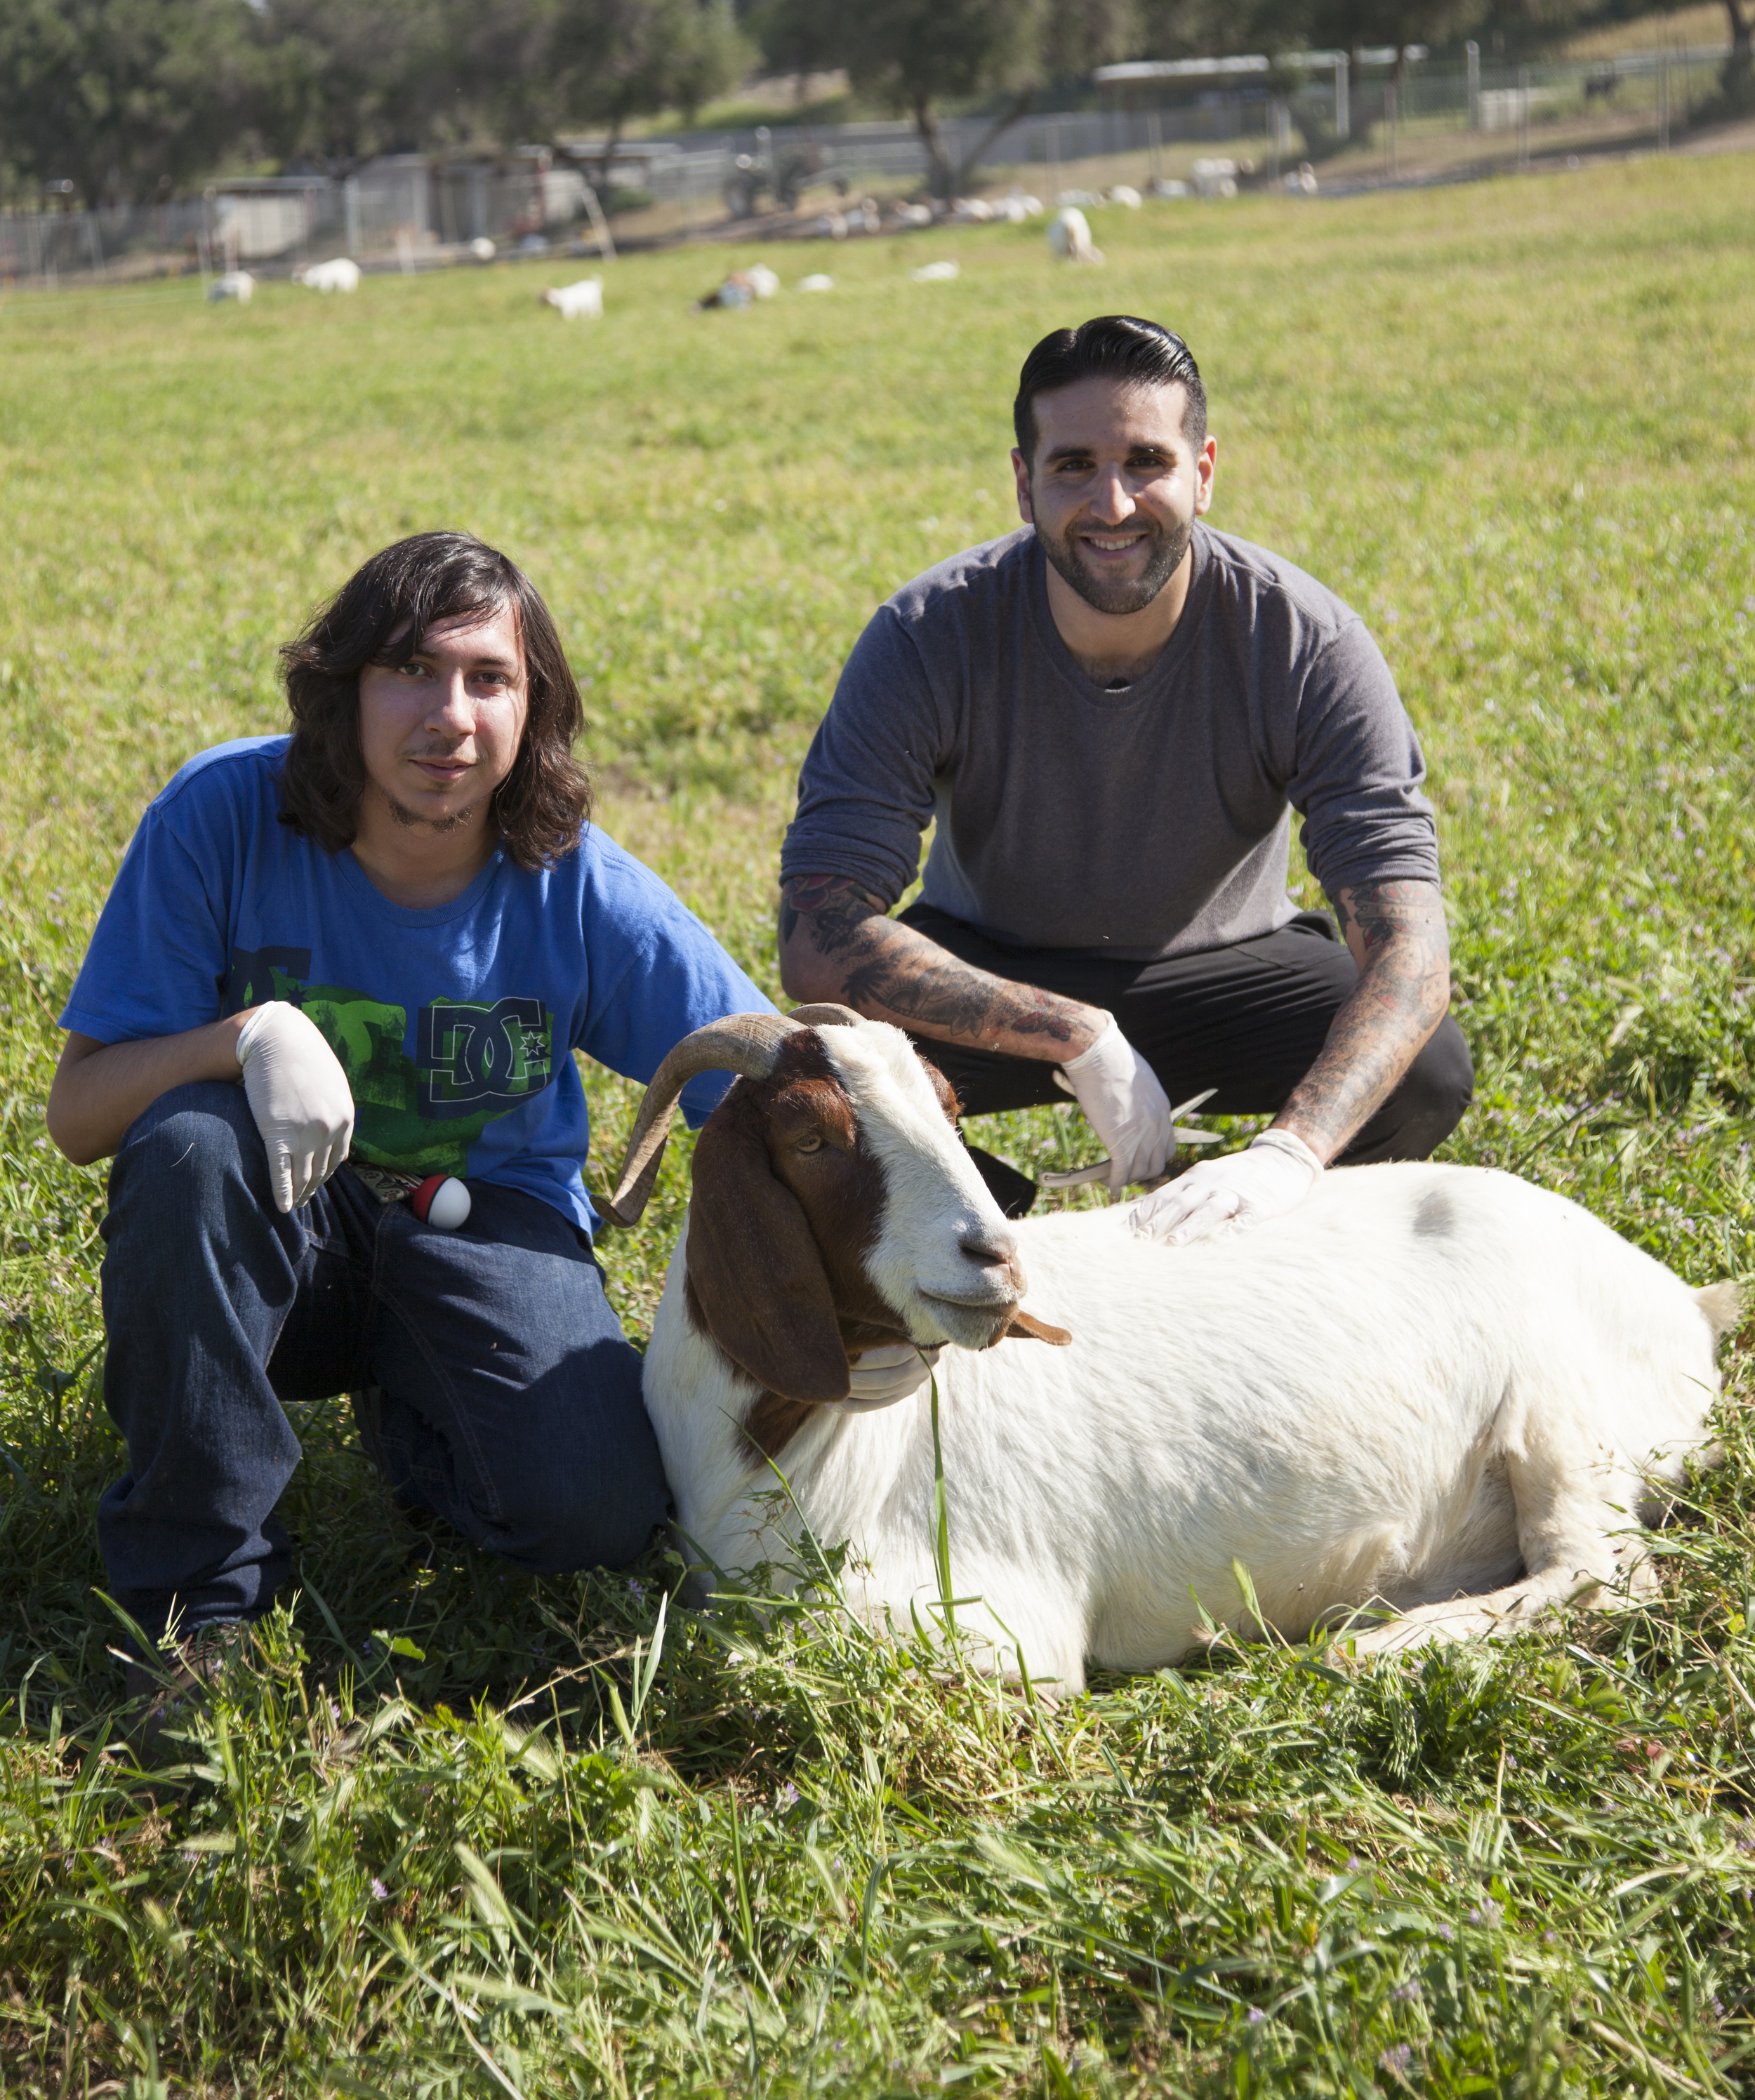  Ivan Barraza and Ben Singh pose for a photo with Flag, the goat, at the Pierce farm on Friday, March 20, 2015. Woodland Hills, Calif.  Read the full story&nbsp; here  